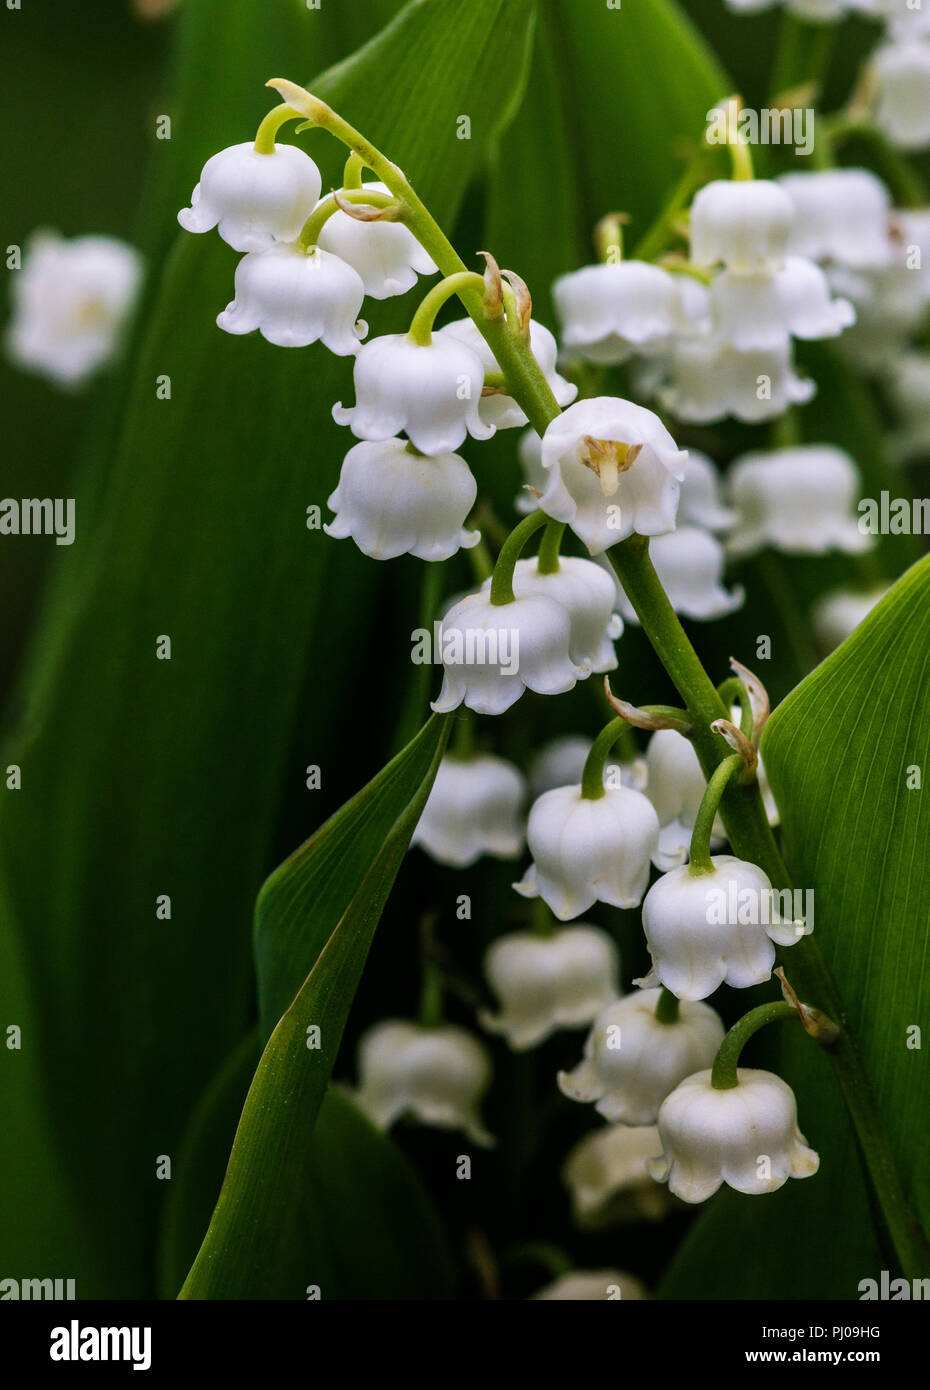 The flowers of the Lily of the Valley (Convallaria majalis) will brighten up the garden in early spring. Stock Photo